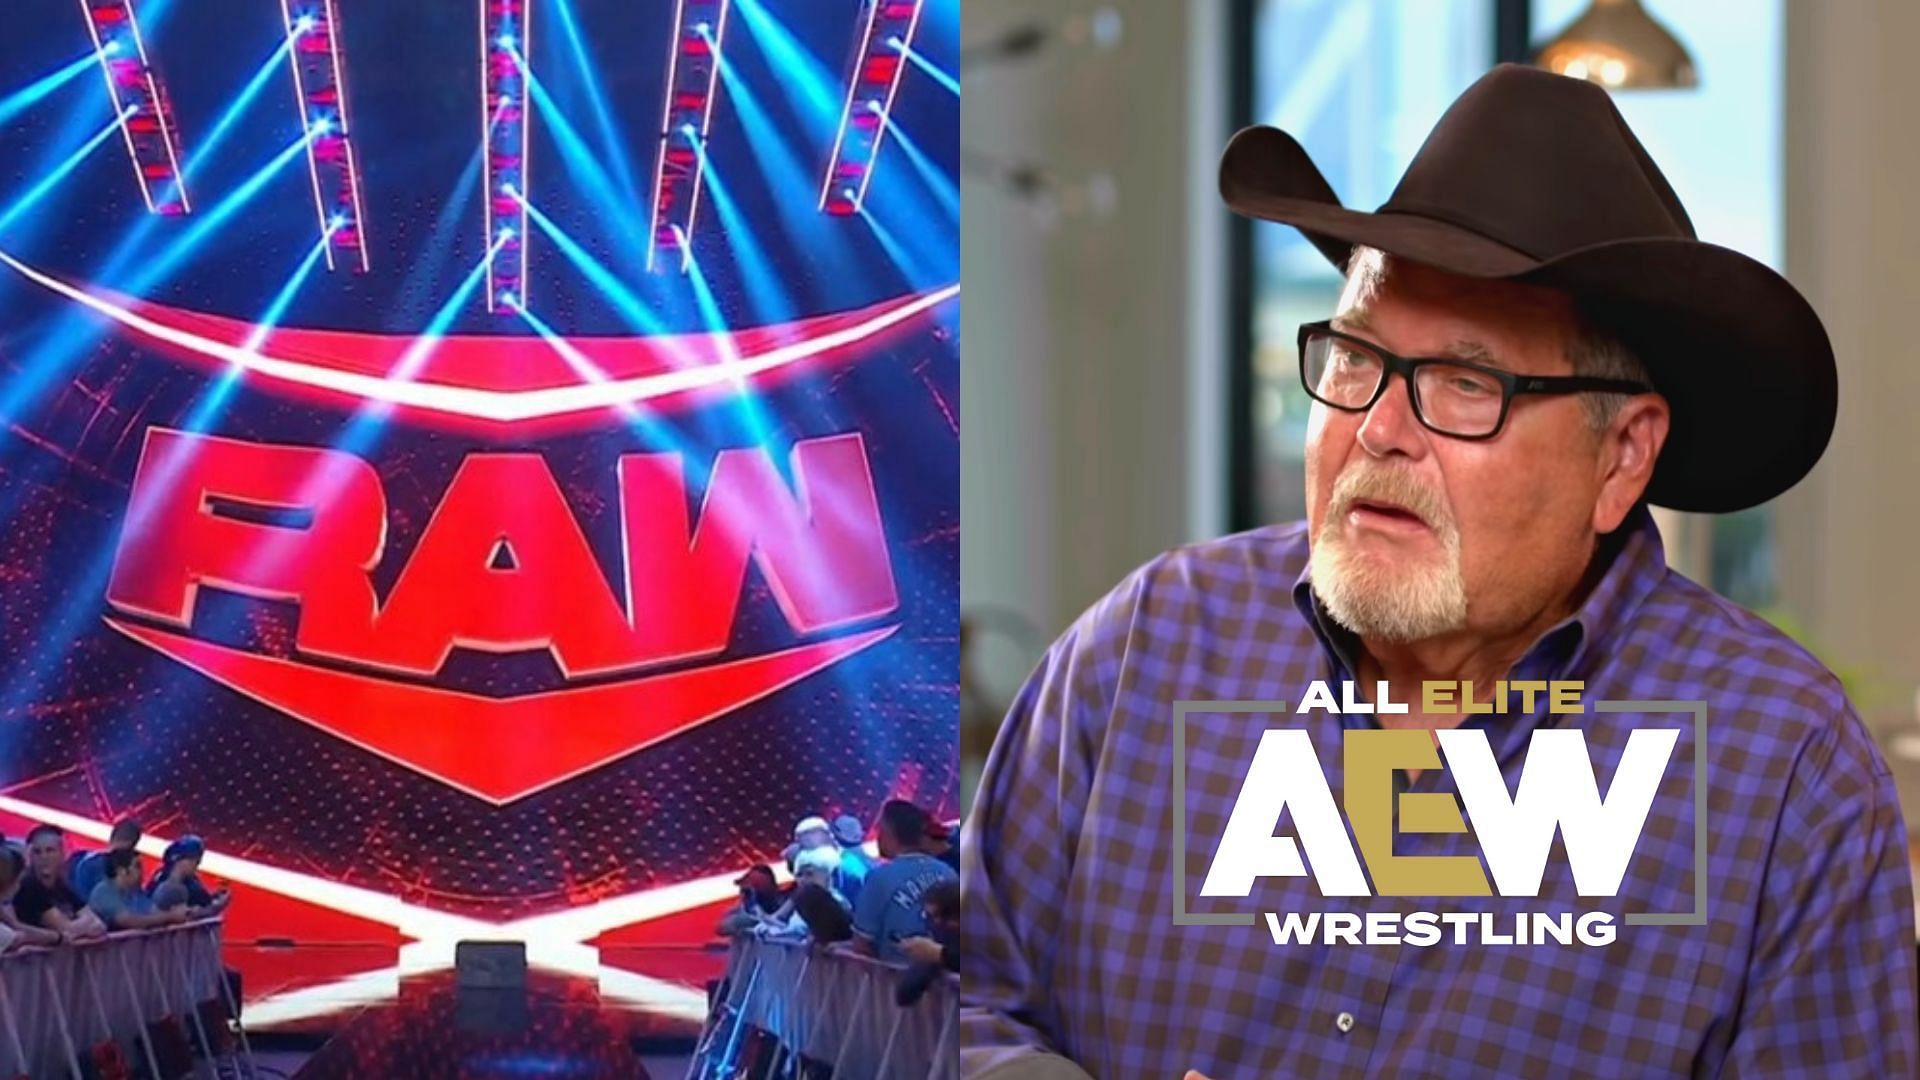 Jim Ross would still like to see the veteran superstar in AEW.